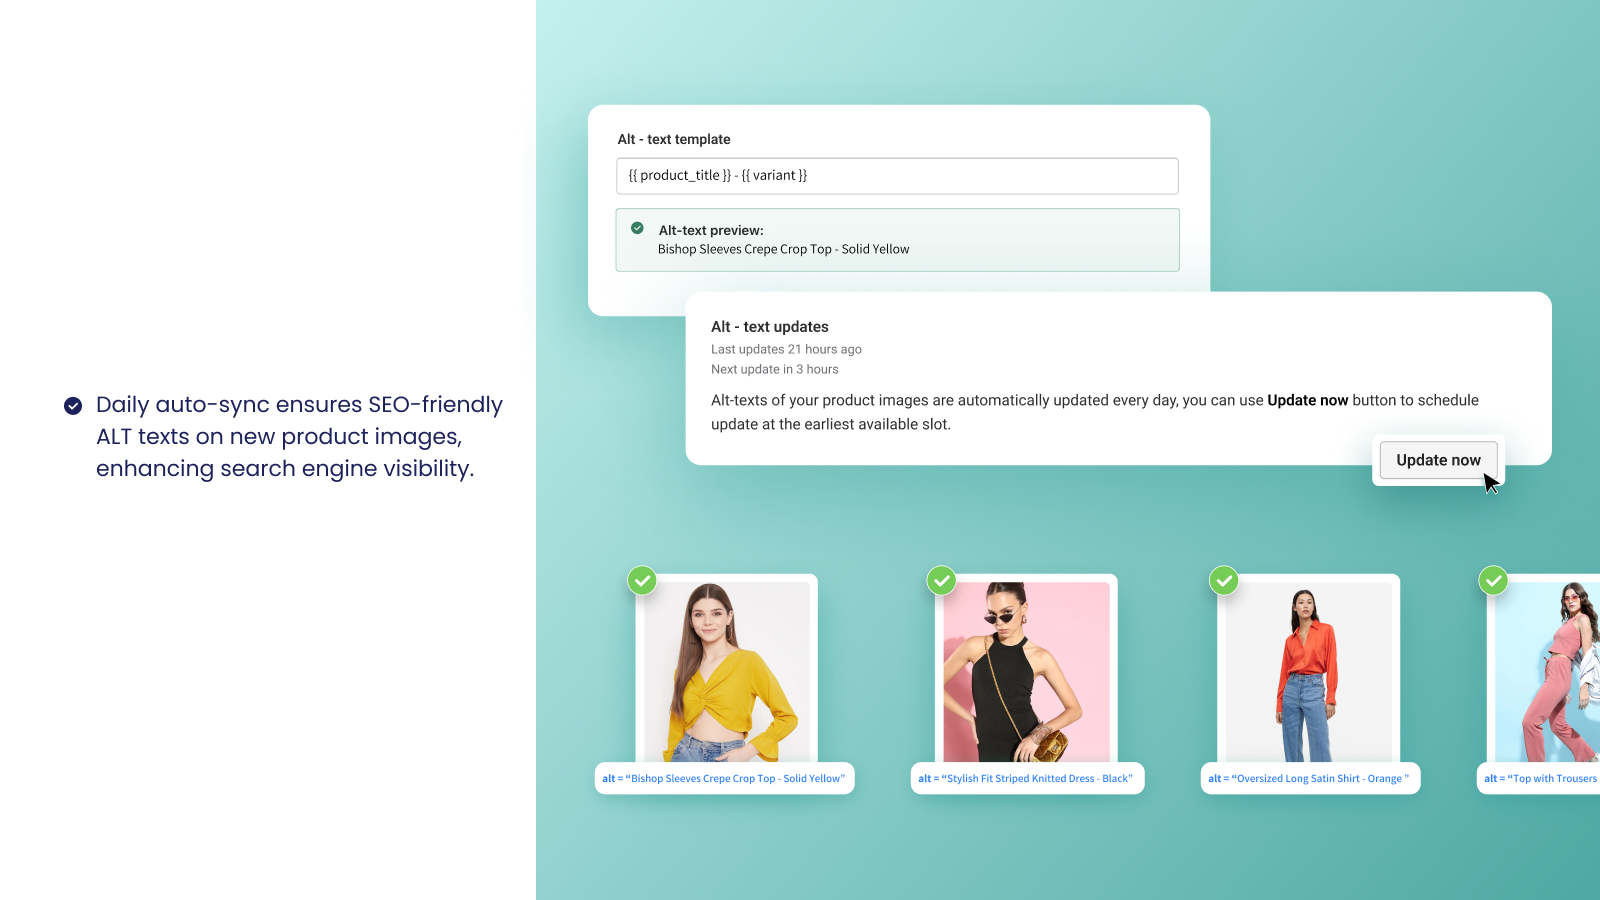 Alt Text King - Automatic Alt Text for product images of Shopify